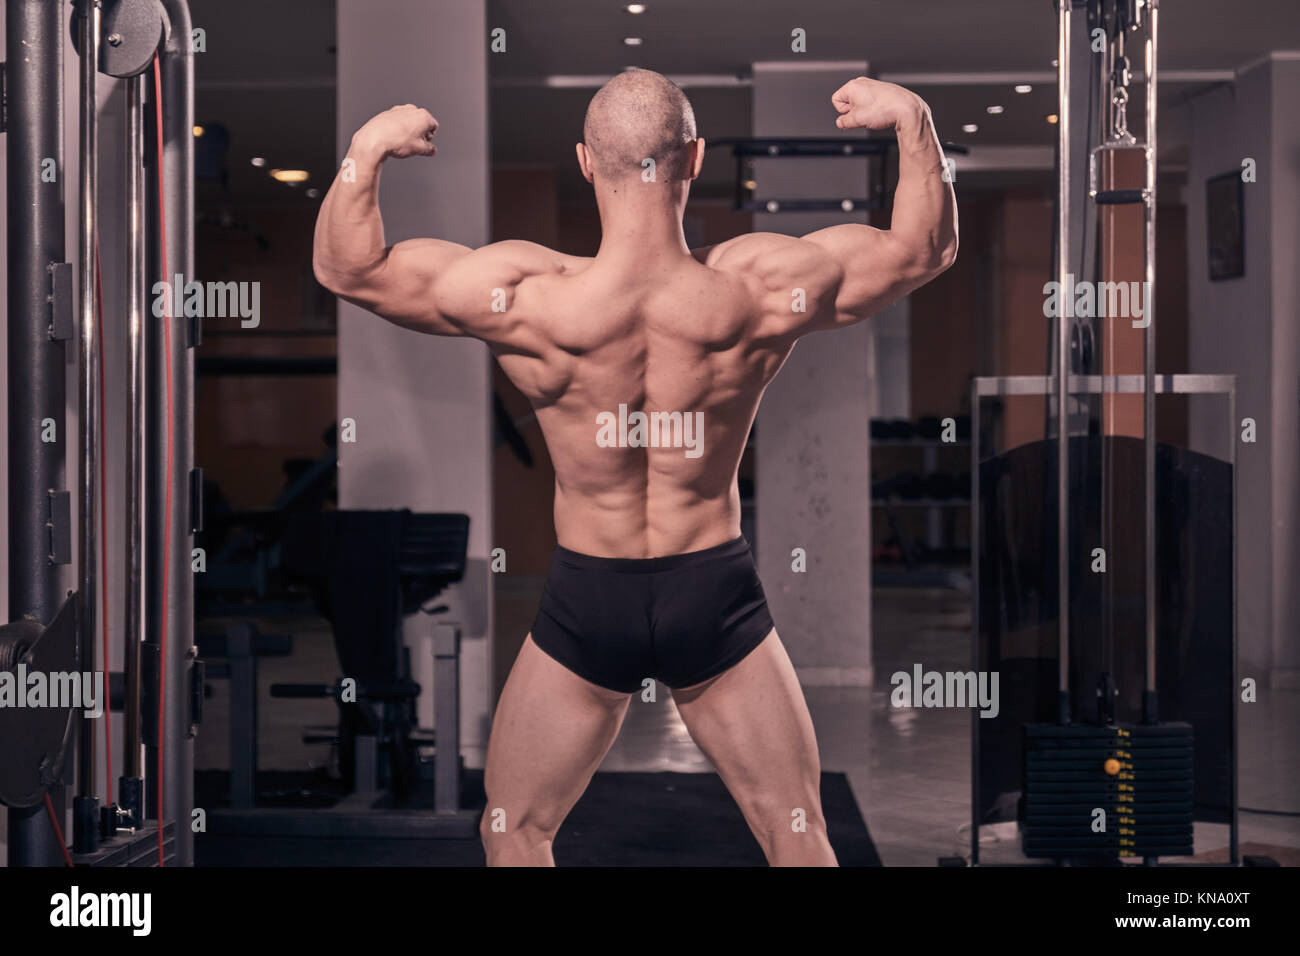 one young bodybuilder posing, rear view, muscular back, gym interior. Stock Photo